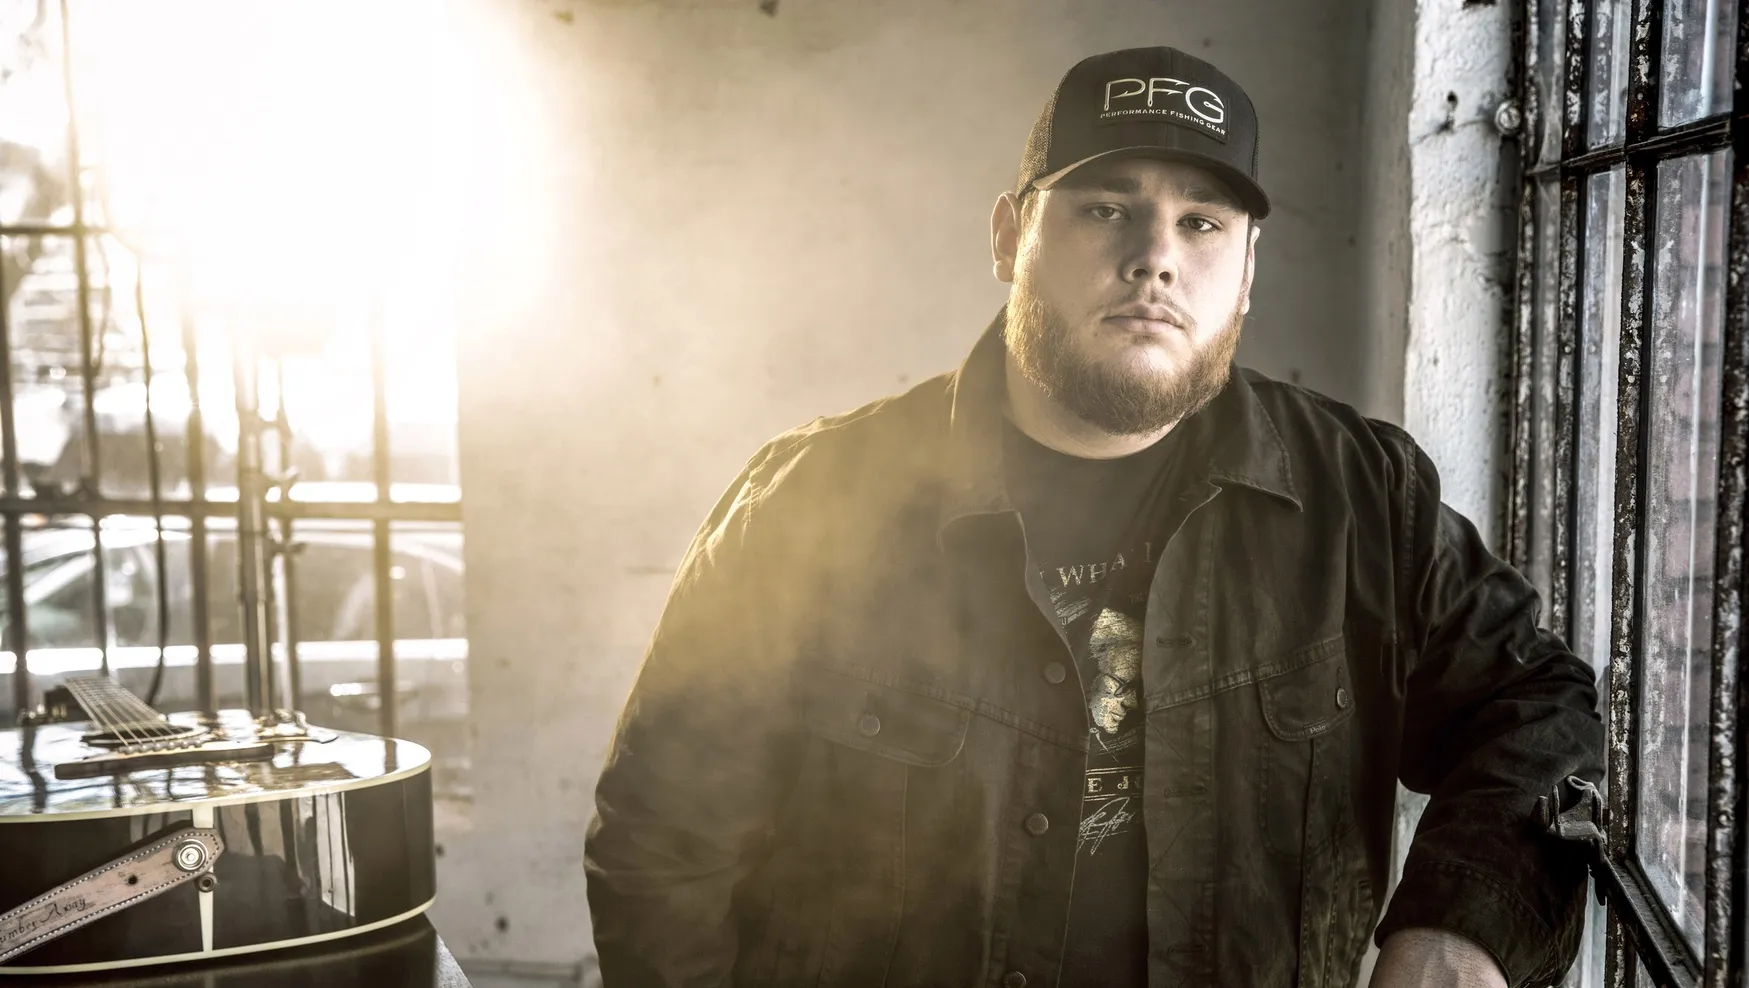 Was Luke Combs on The Voice?